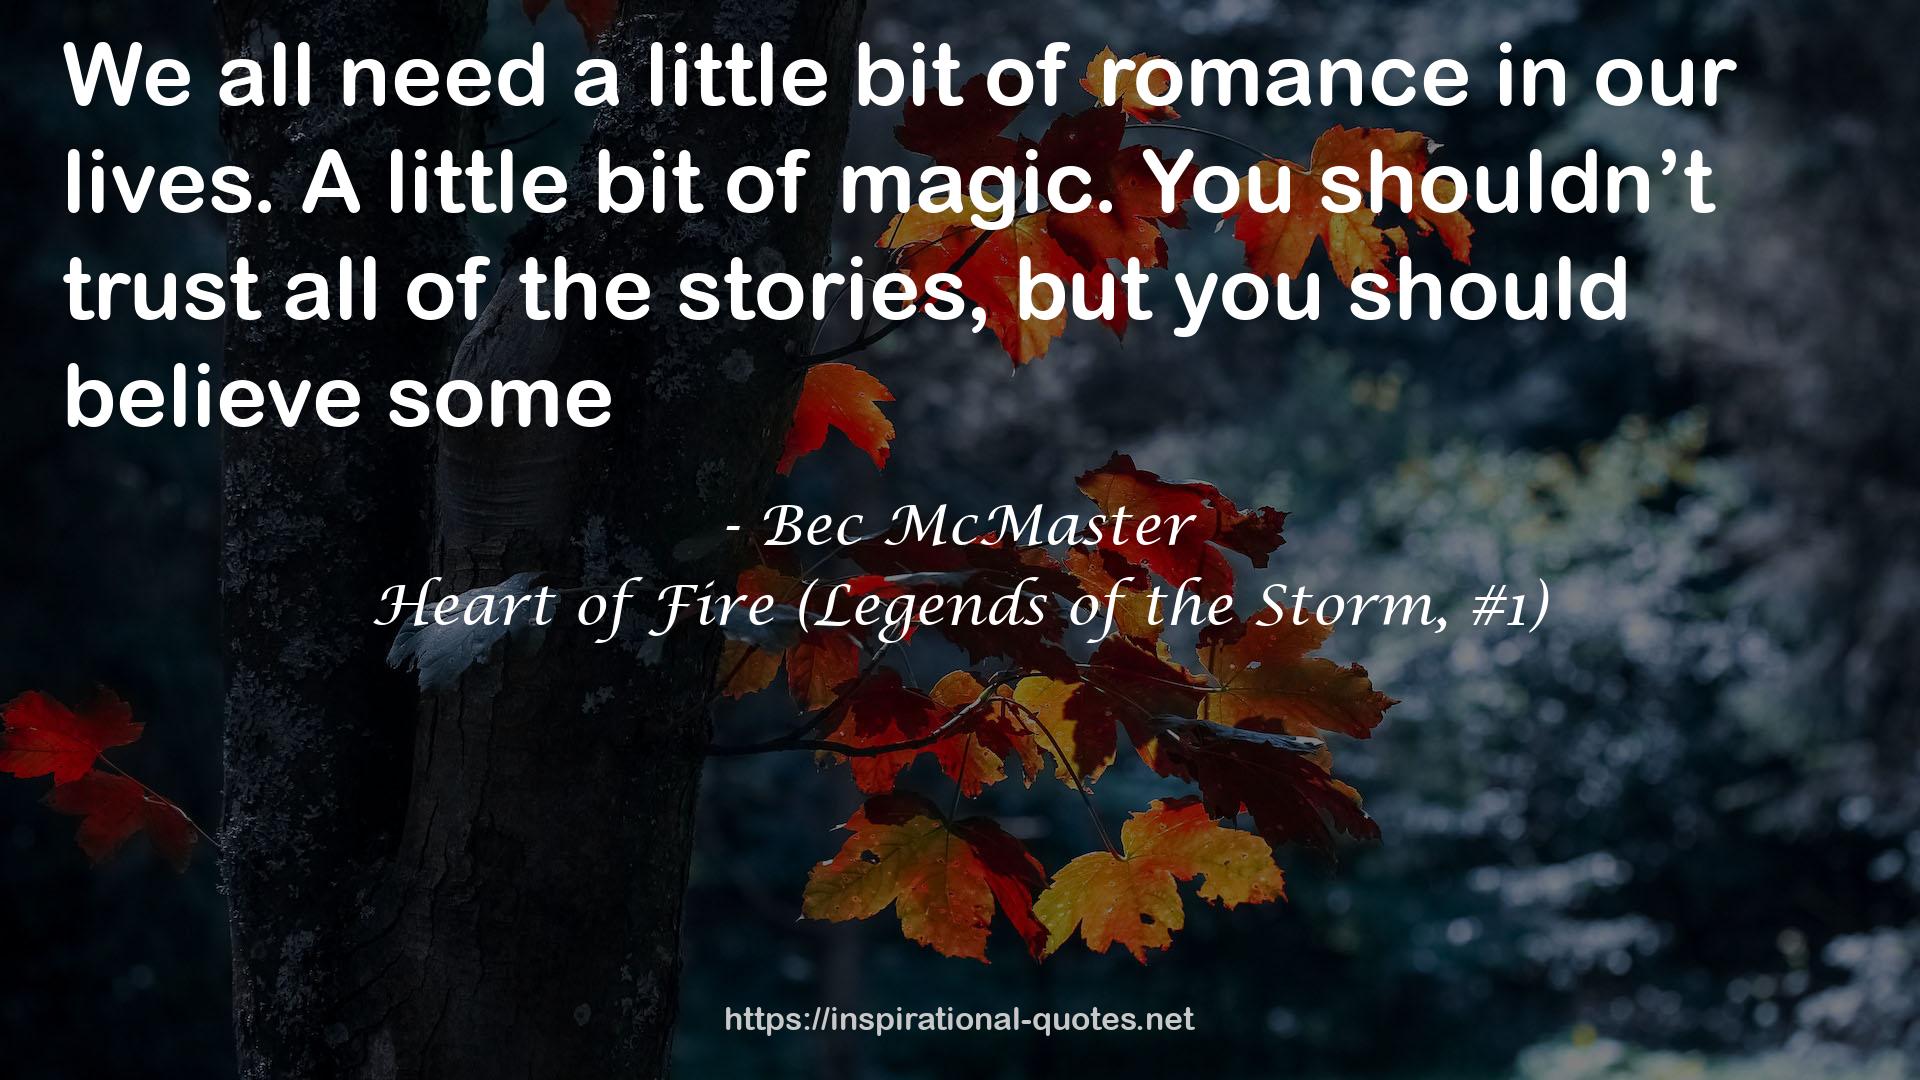 Heart of Fire (Legends of the Storm, #1) QUOTES